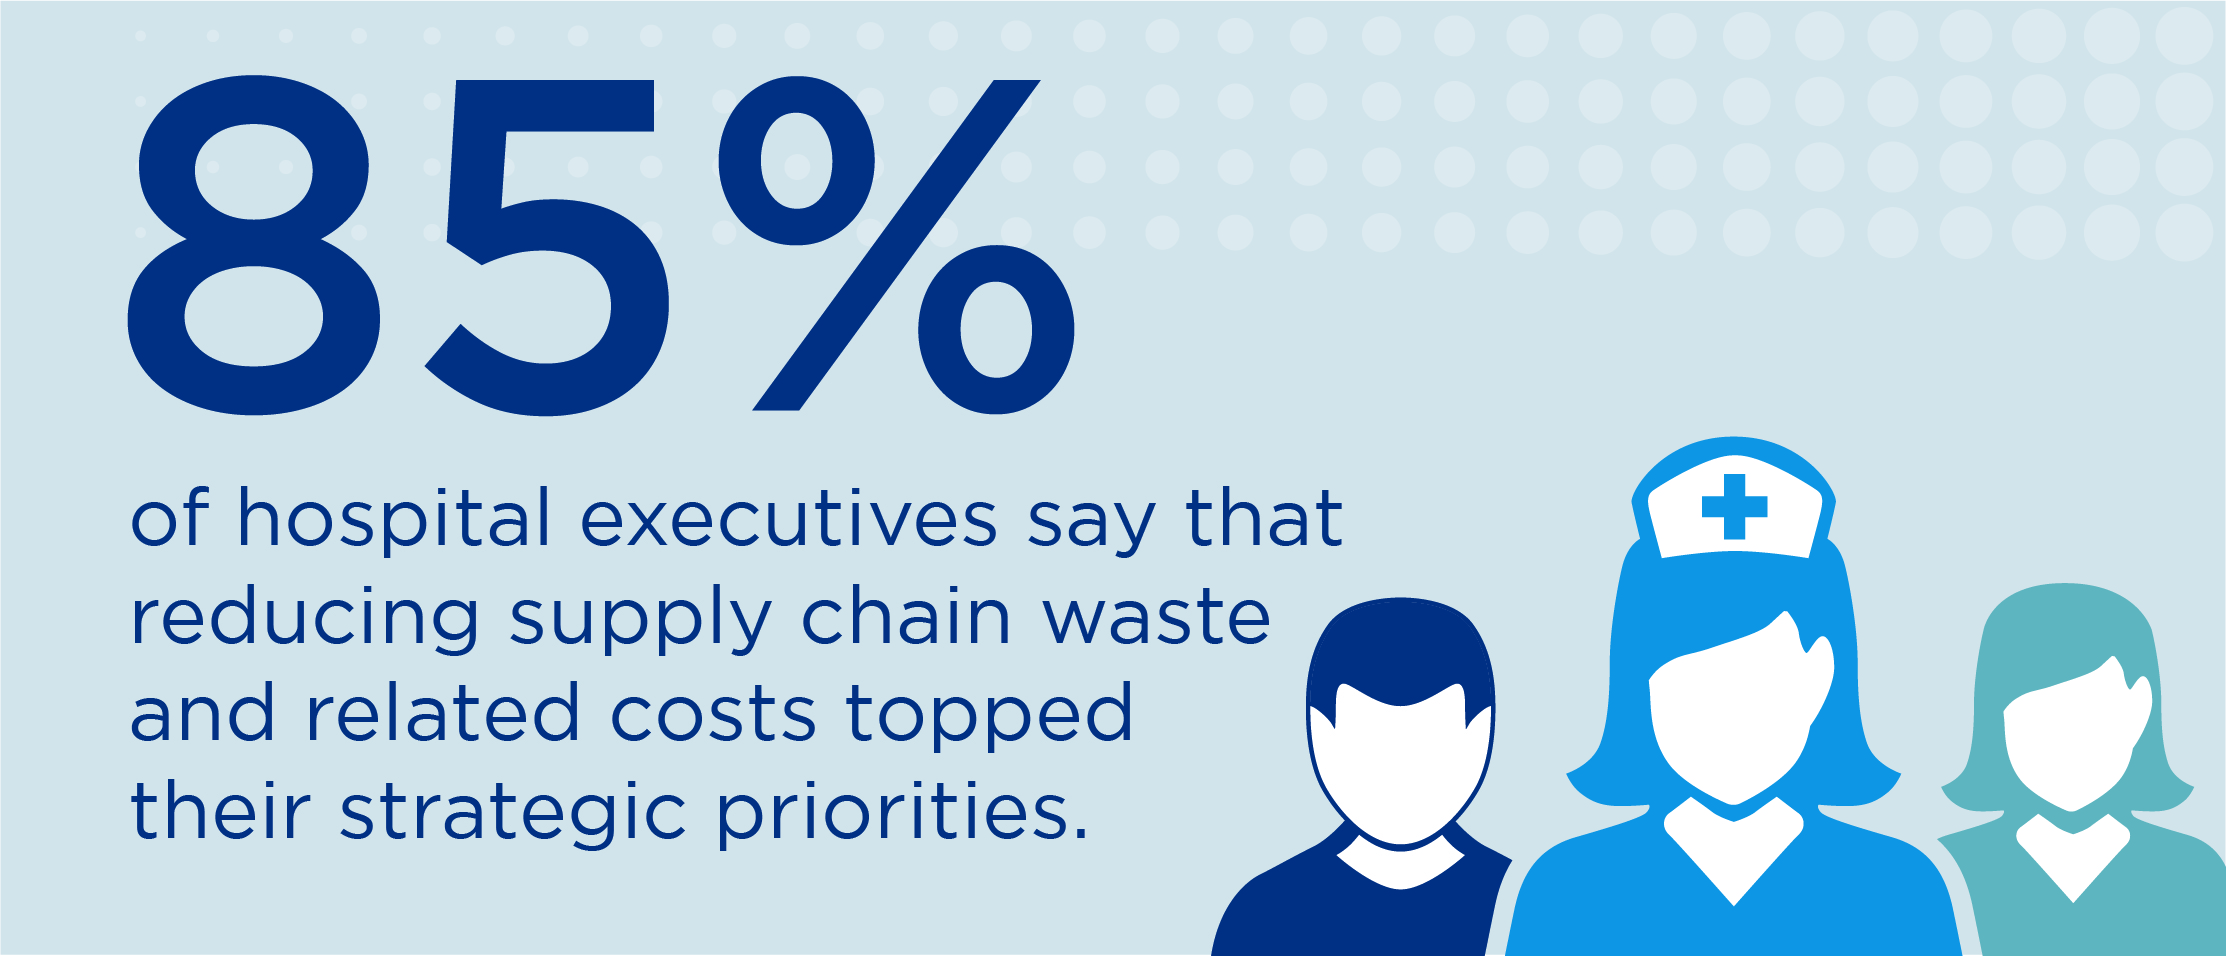 85 percent of hospital execs say reducing supply chain waste and related costs topped their strategic priorities.